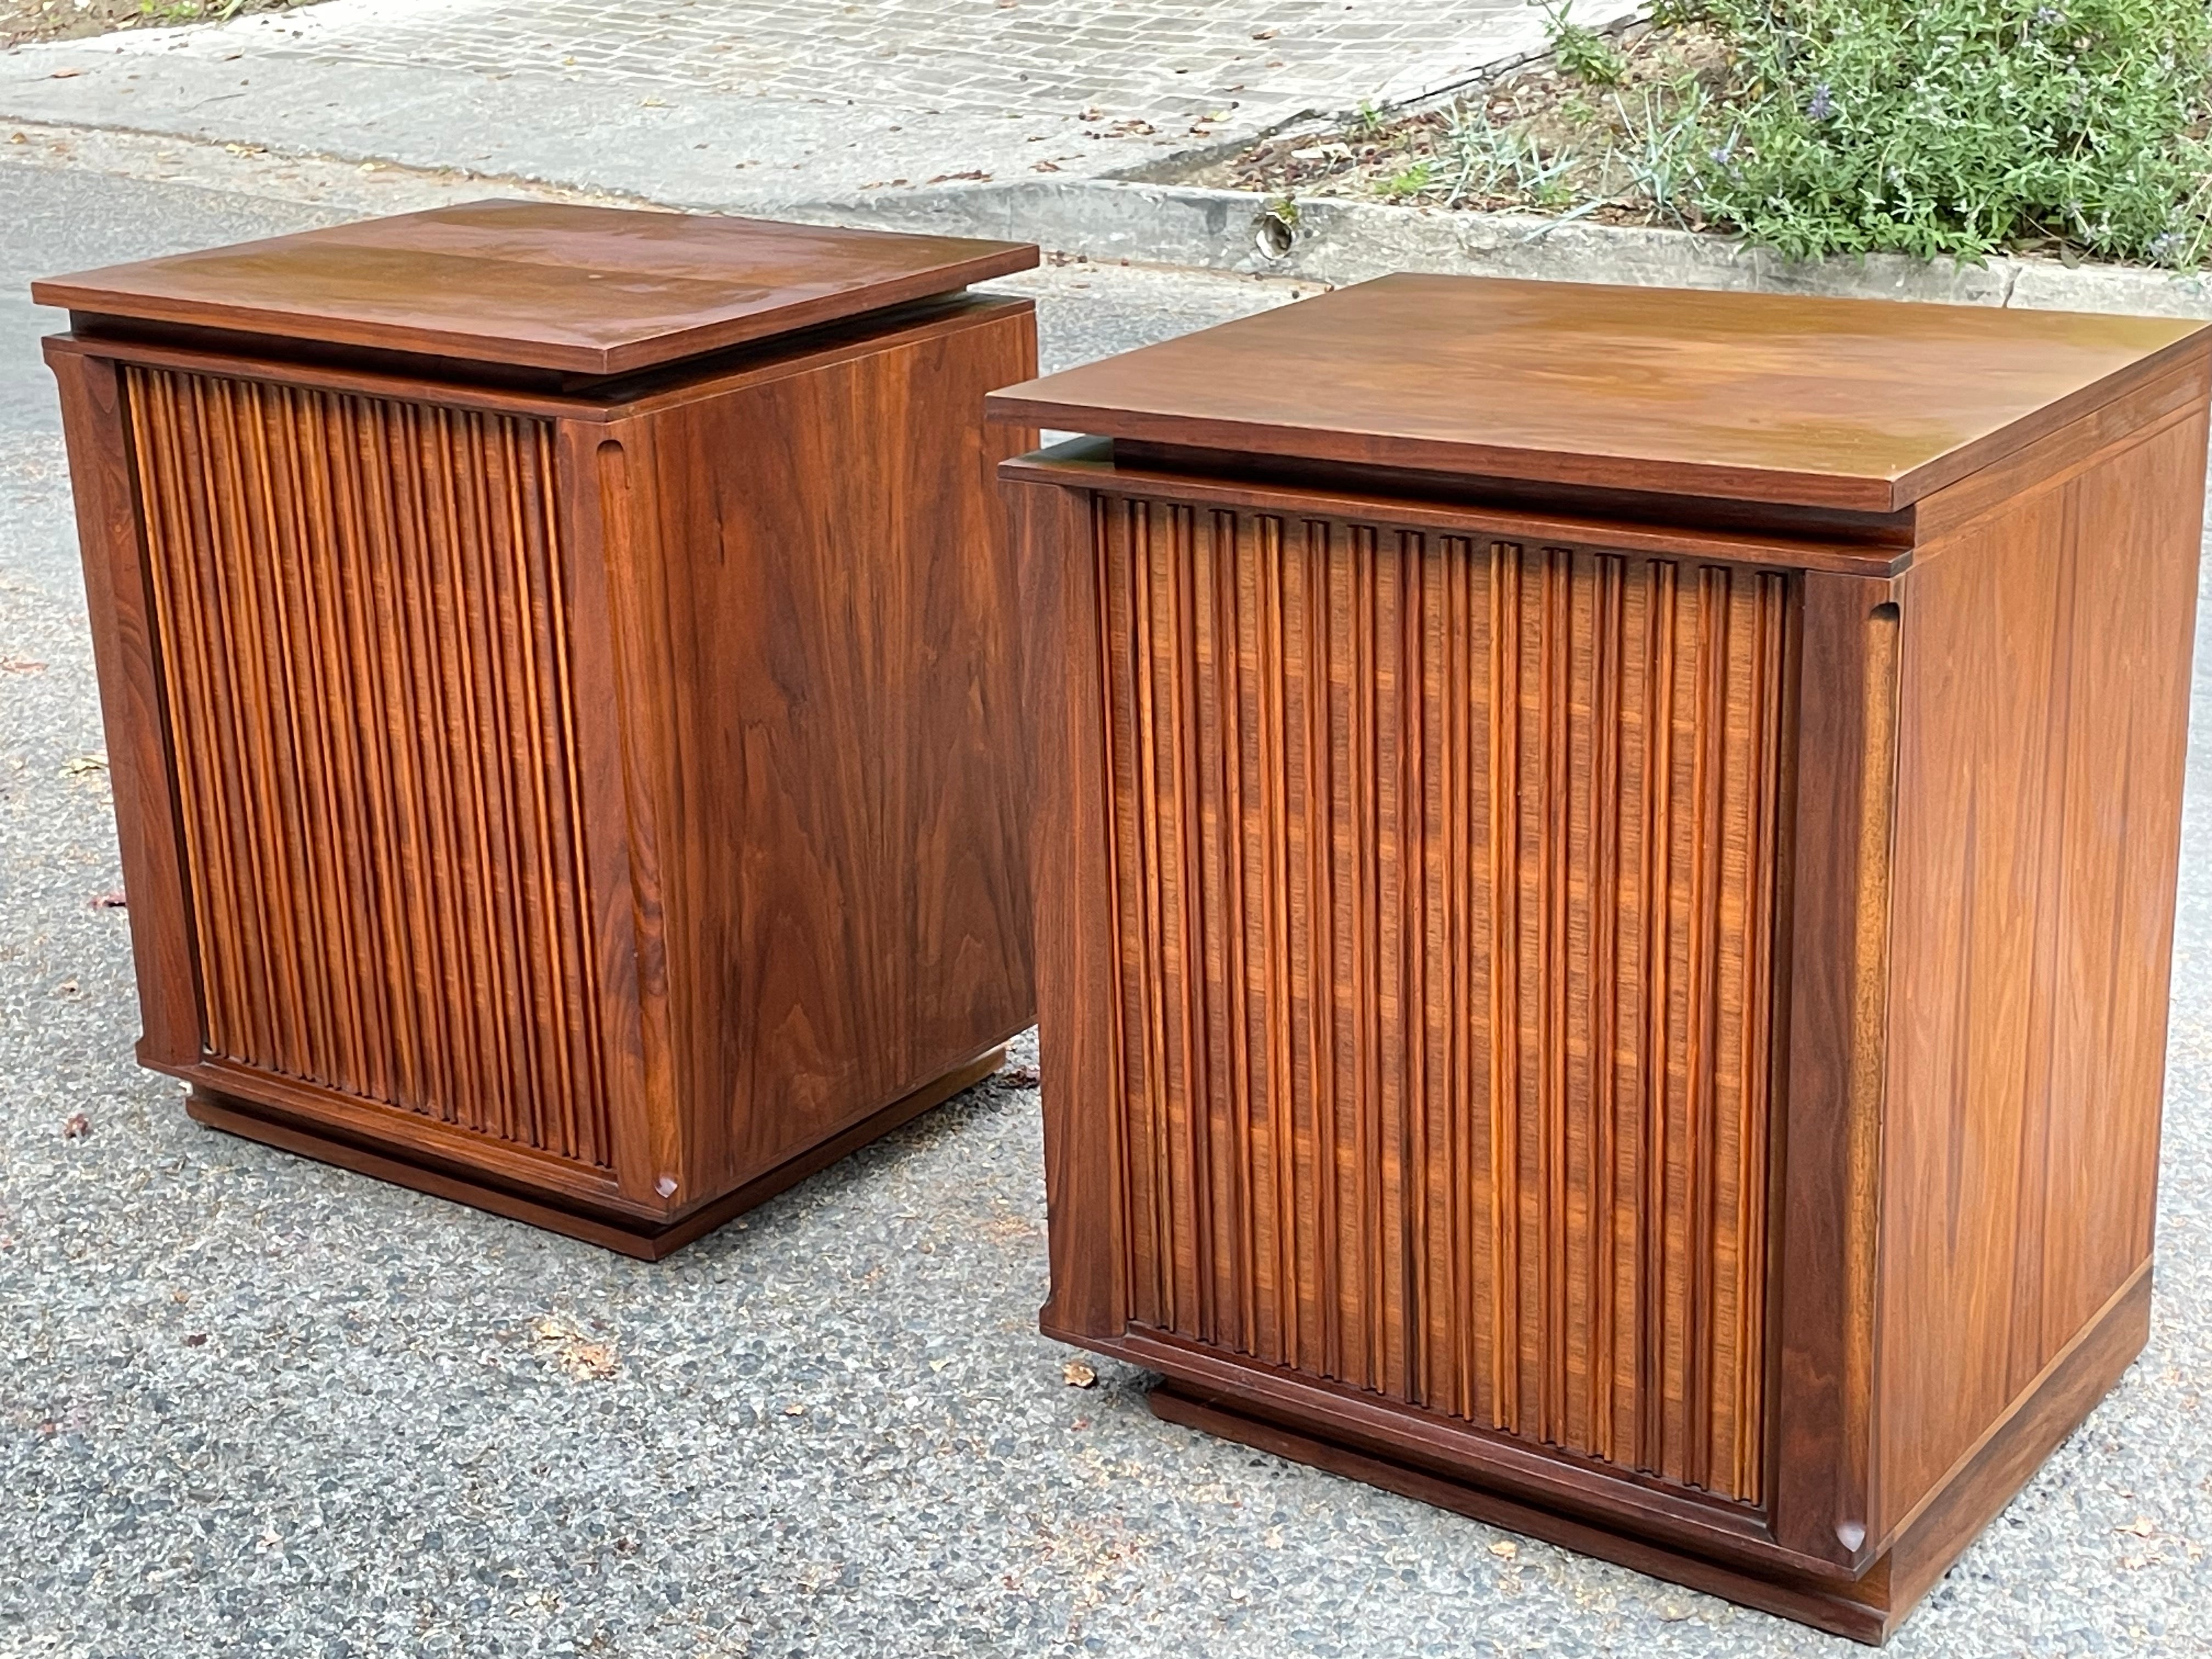 Gorgeous Mid-Century Modern Tambour Door Nighstands End Tables by Barzilay. 

Barzilay design originally used speaker cabinets. Inside is totally open so it's great for nightstands or end tables.

Rare piece. The two pieces can also be used